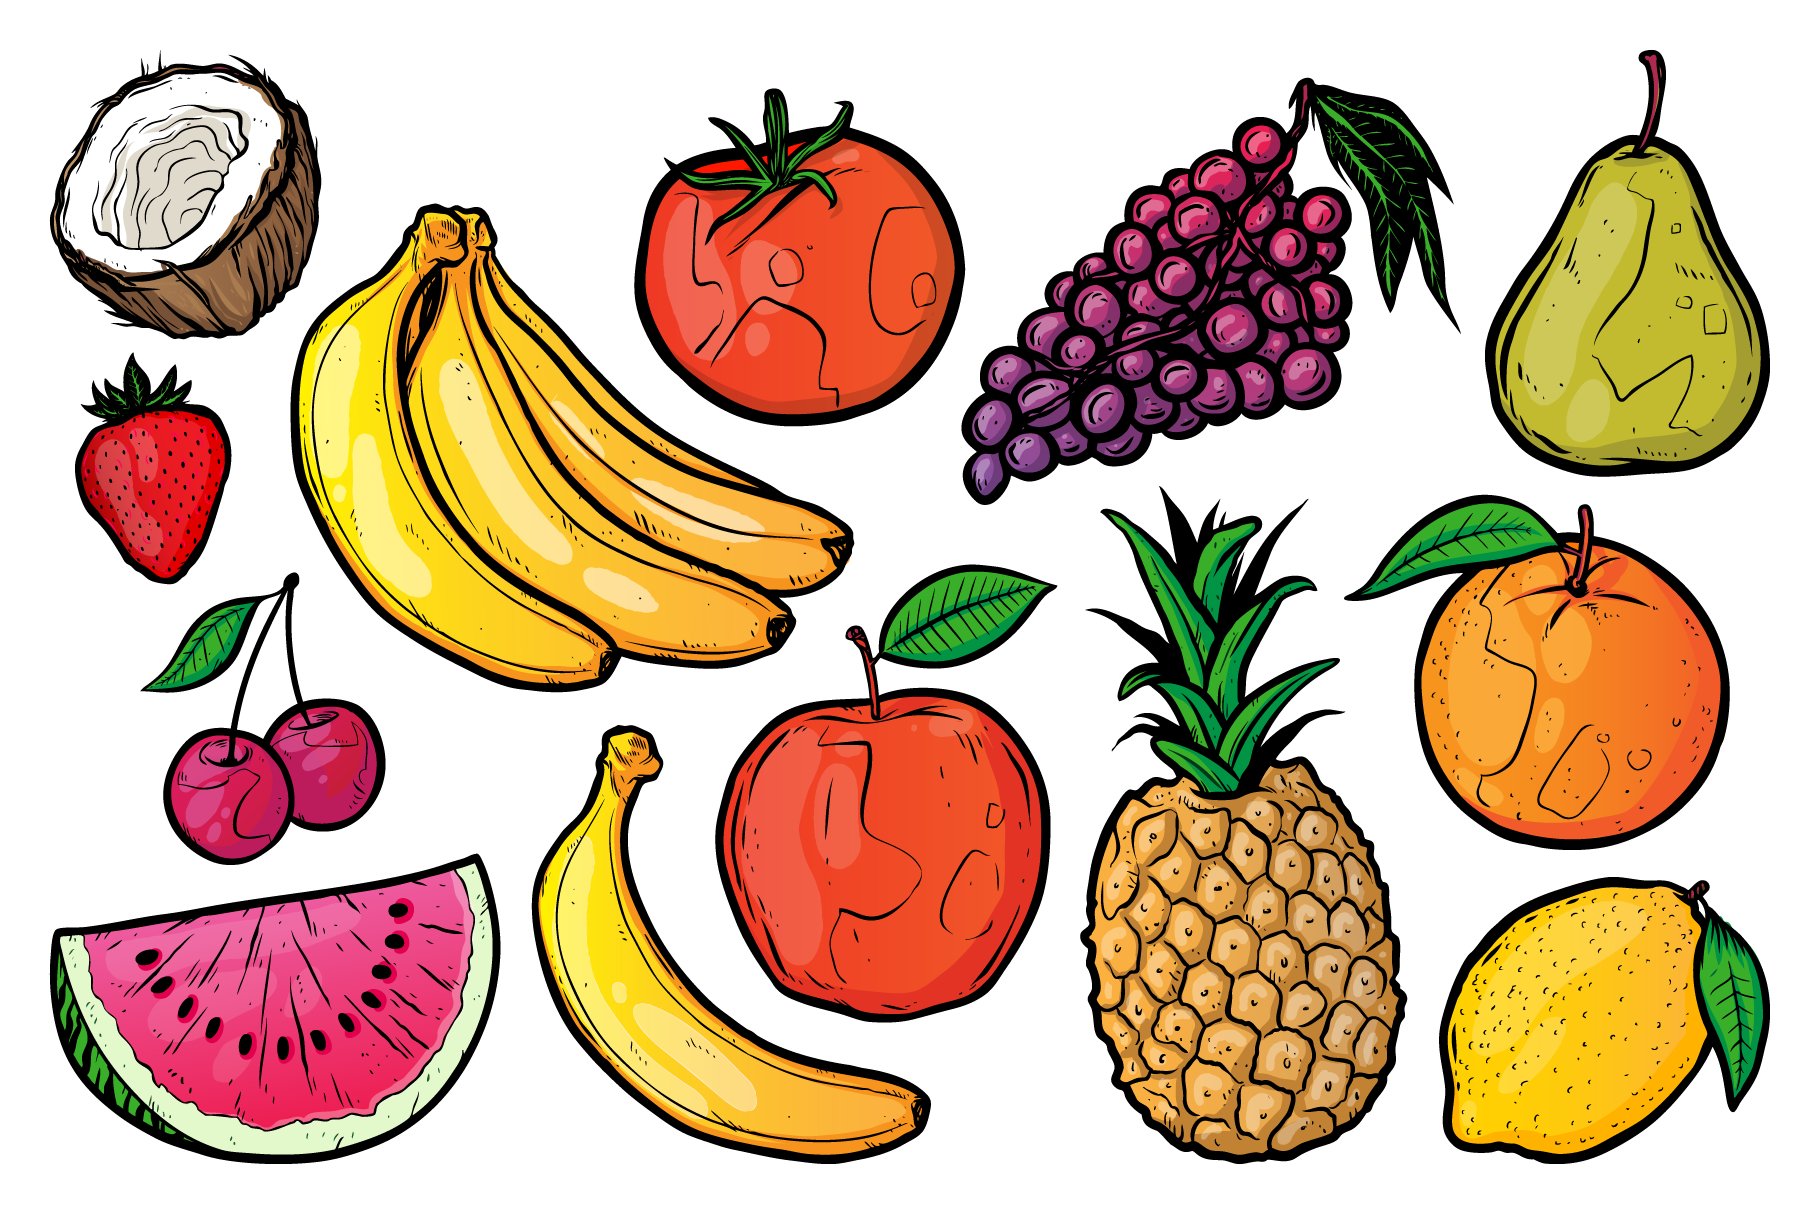 How to draw fruits for beginners, fresh fruits and vegetables drawing | Fruits  drawing, Vegetable drawing, Fruit sketch